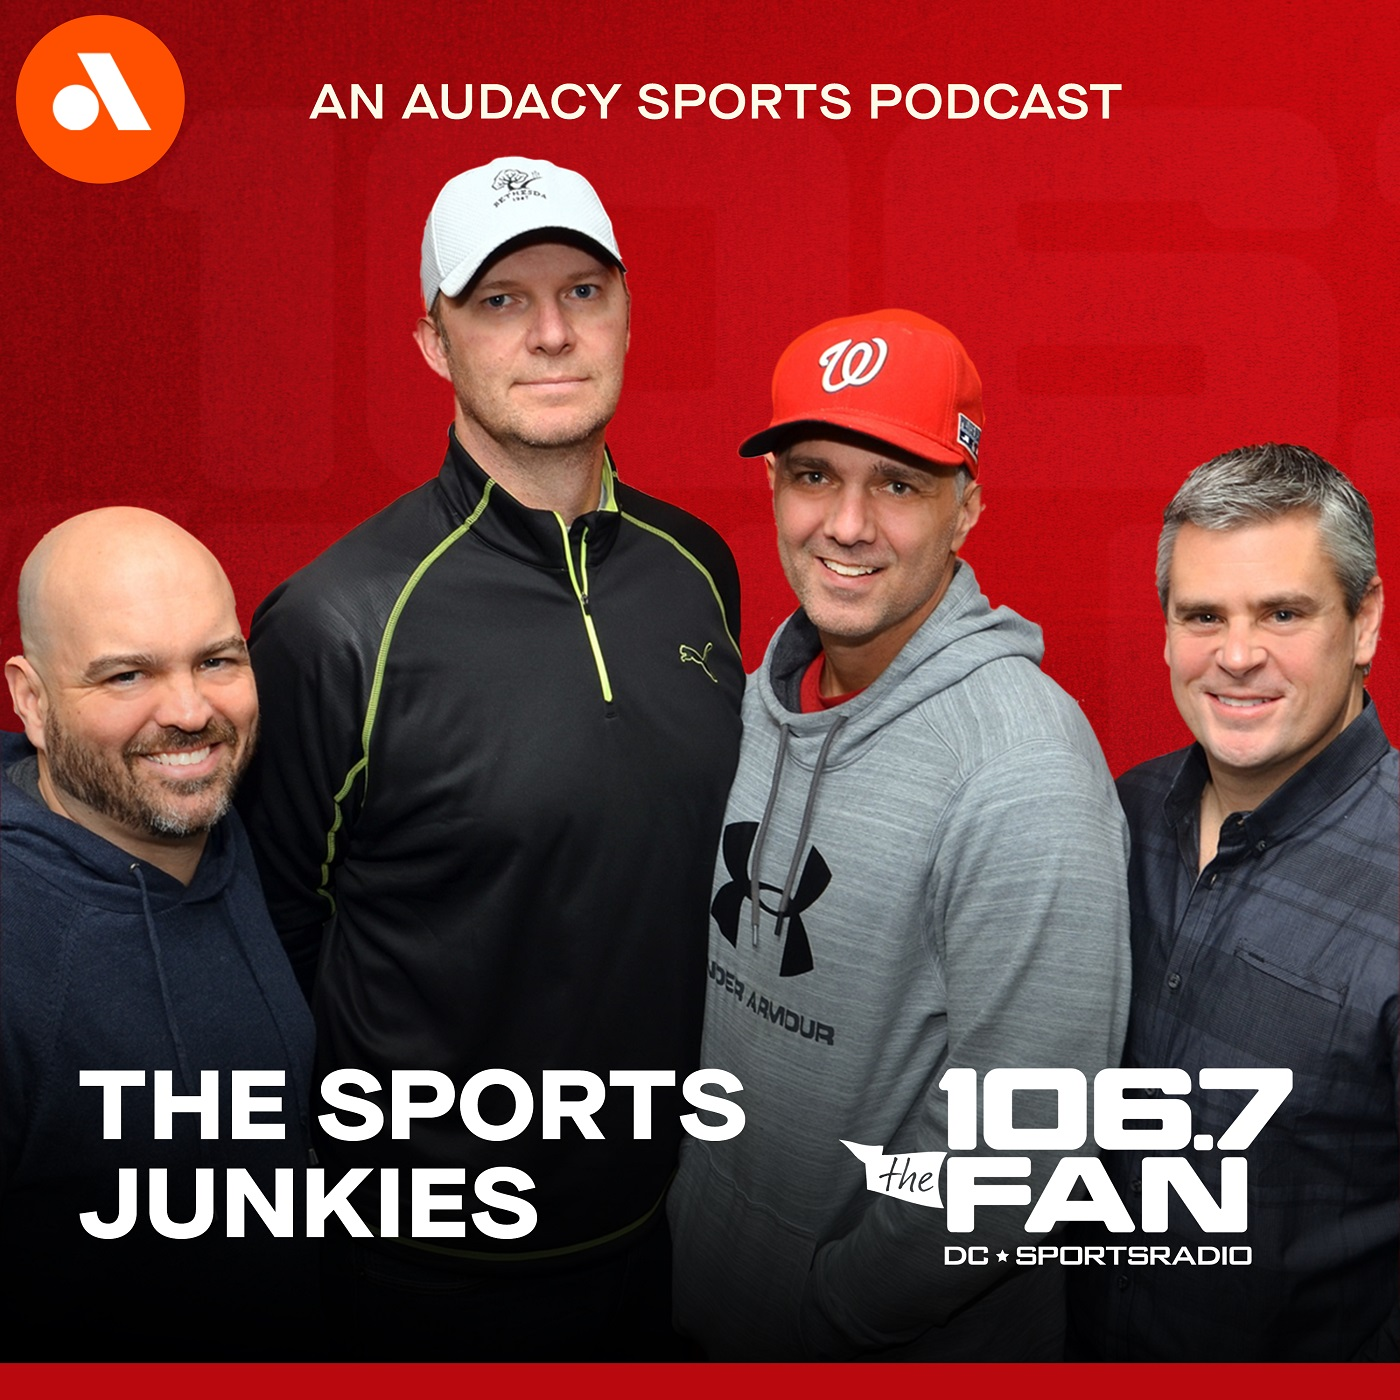 The Sports Junkies Hour 4- Houston Nutt on CFP championship game, EB's Entertainment page, Draymond Green prop controversy